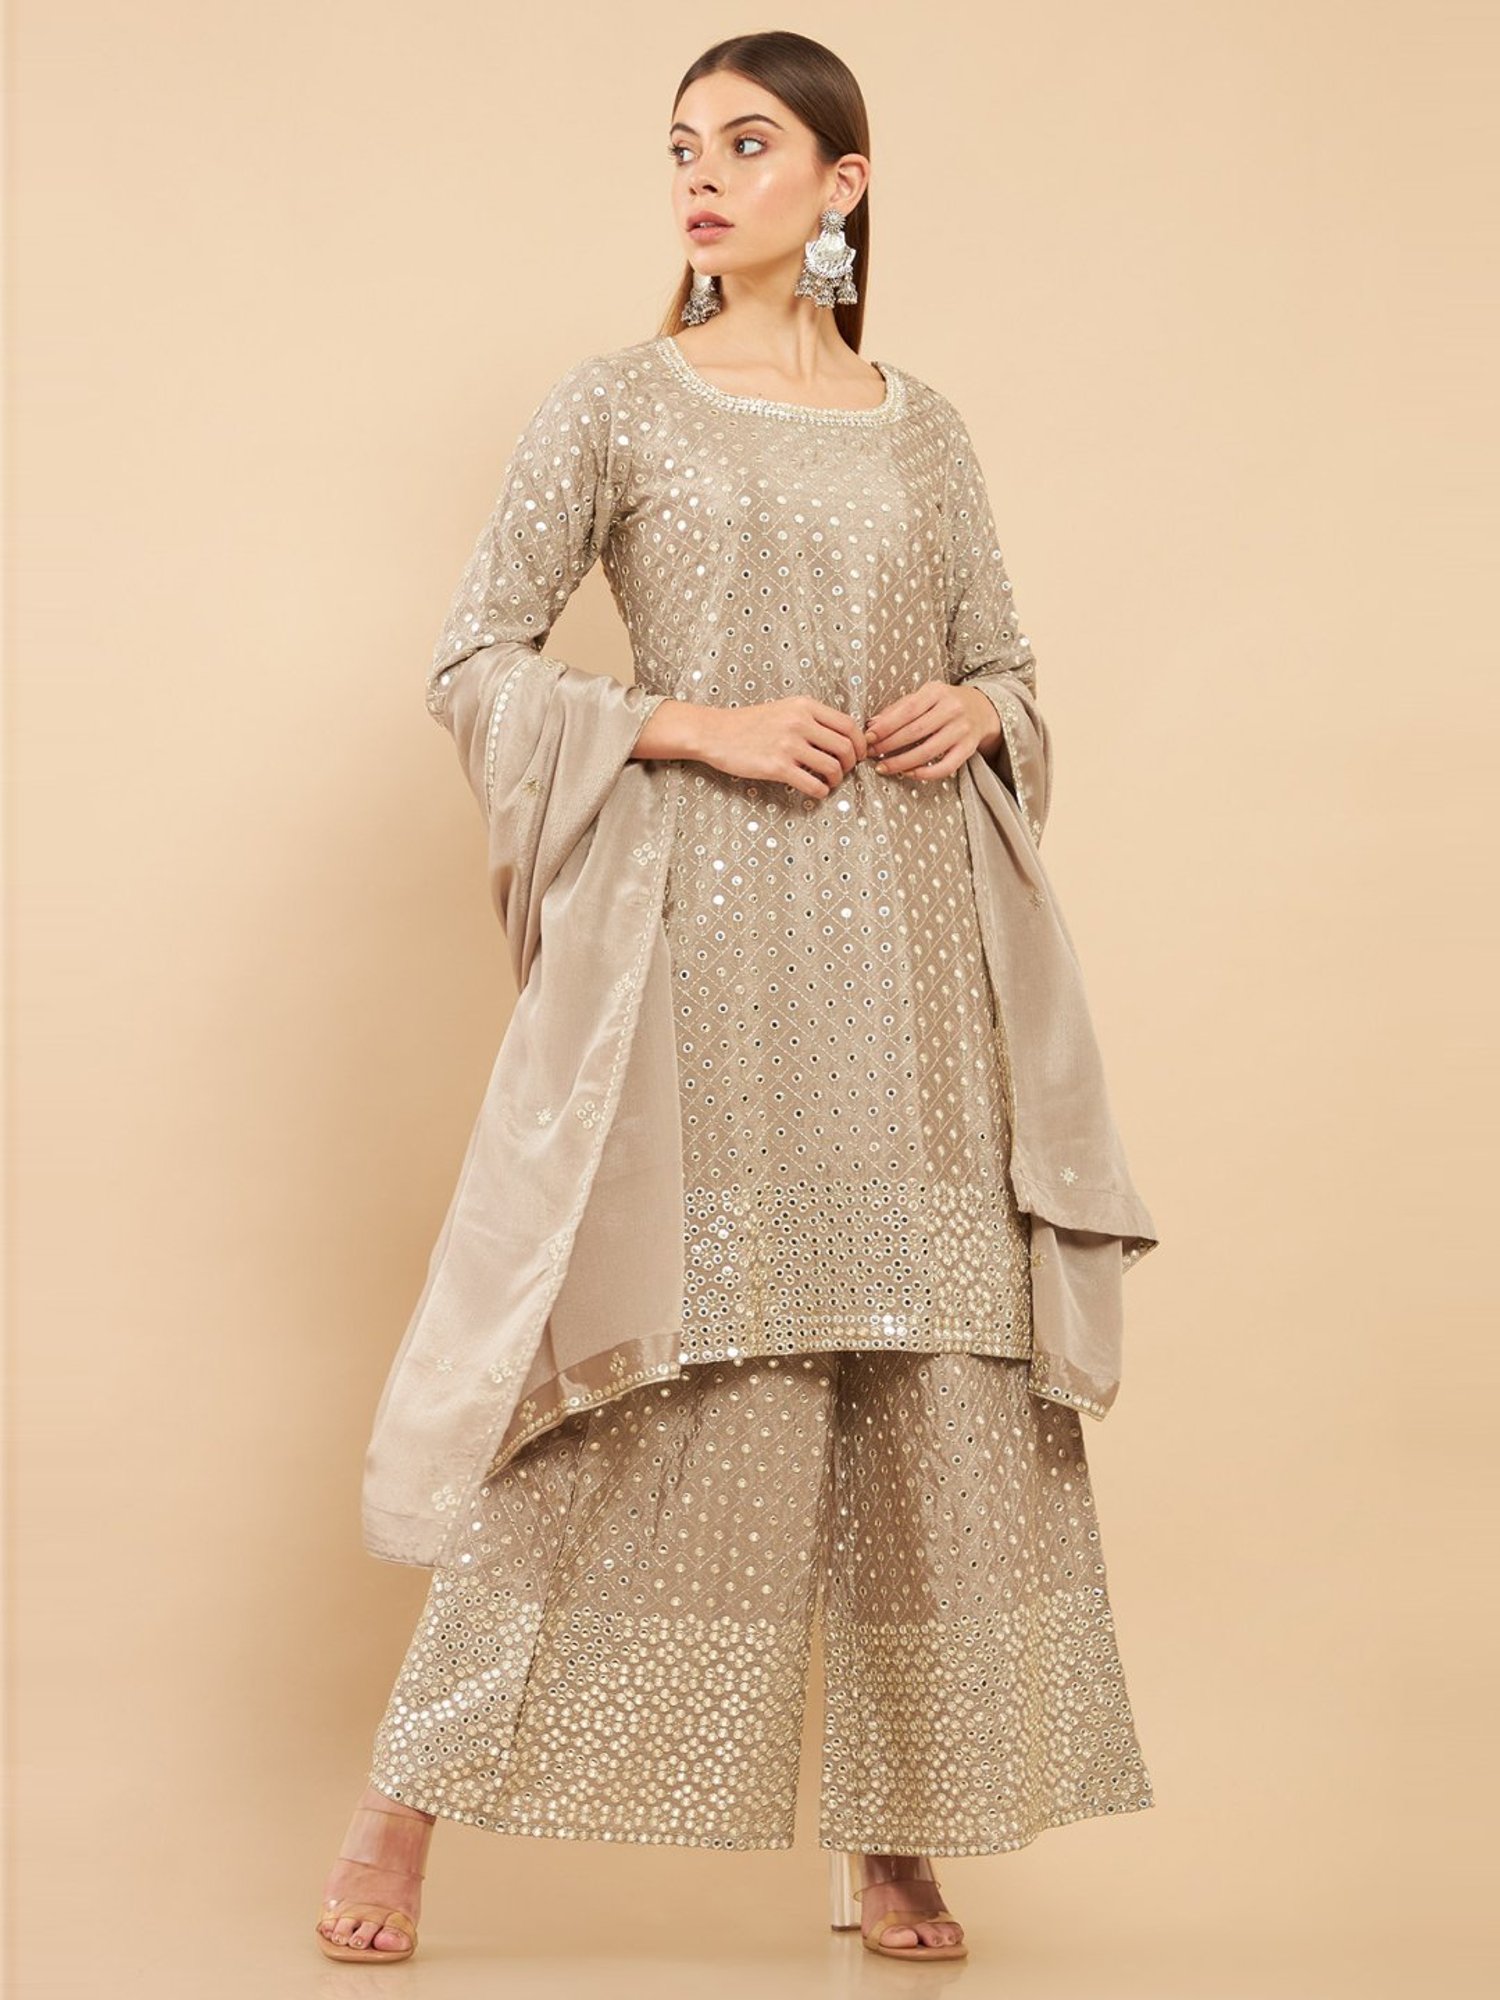 Soch - #Soch's latest collection of kurti suits, ready to stitch dress  materials and sarees. Visit www.sochstudio.com to check out the entire  collection, pricing details and shop online. | Facebook